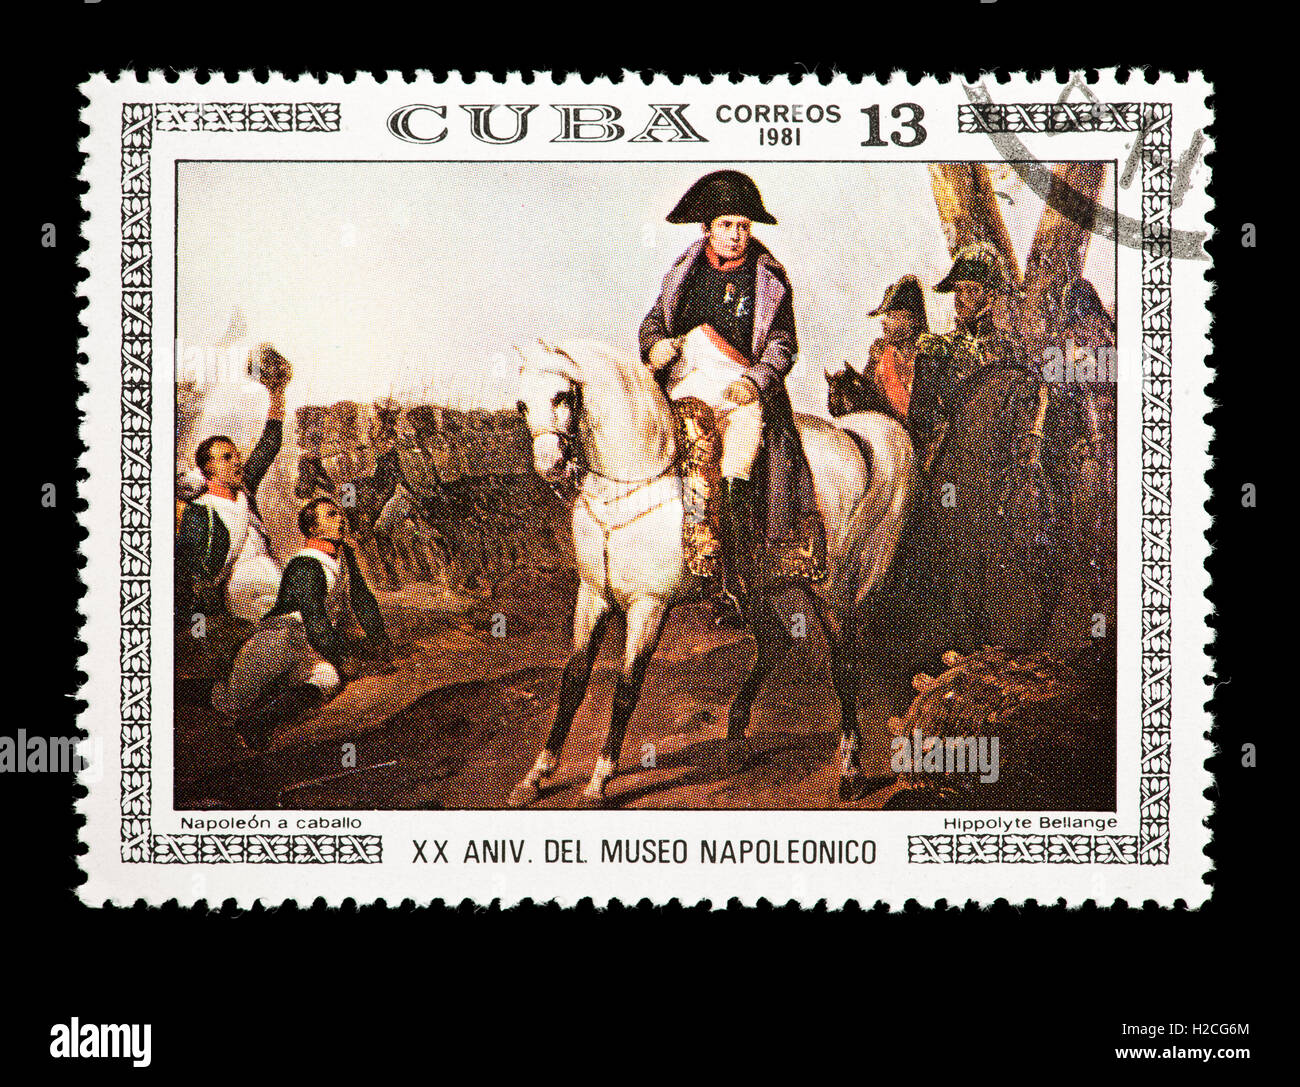 Postage stamp from Cuba depicting the Hippolyte Bellange painting Napoleon on Horseback. Stock Photo